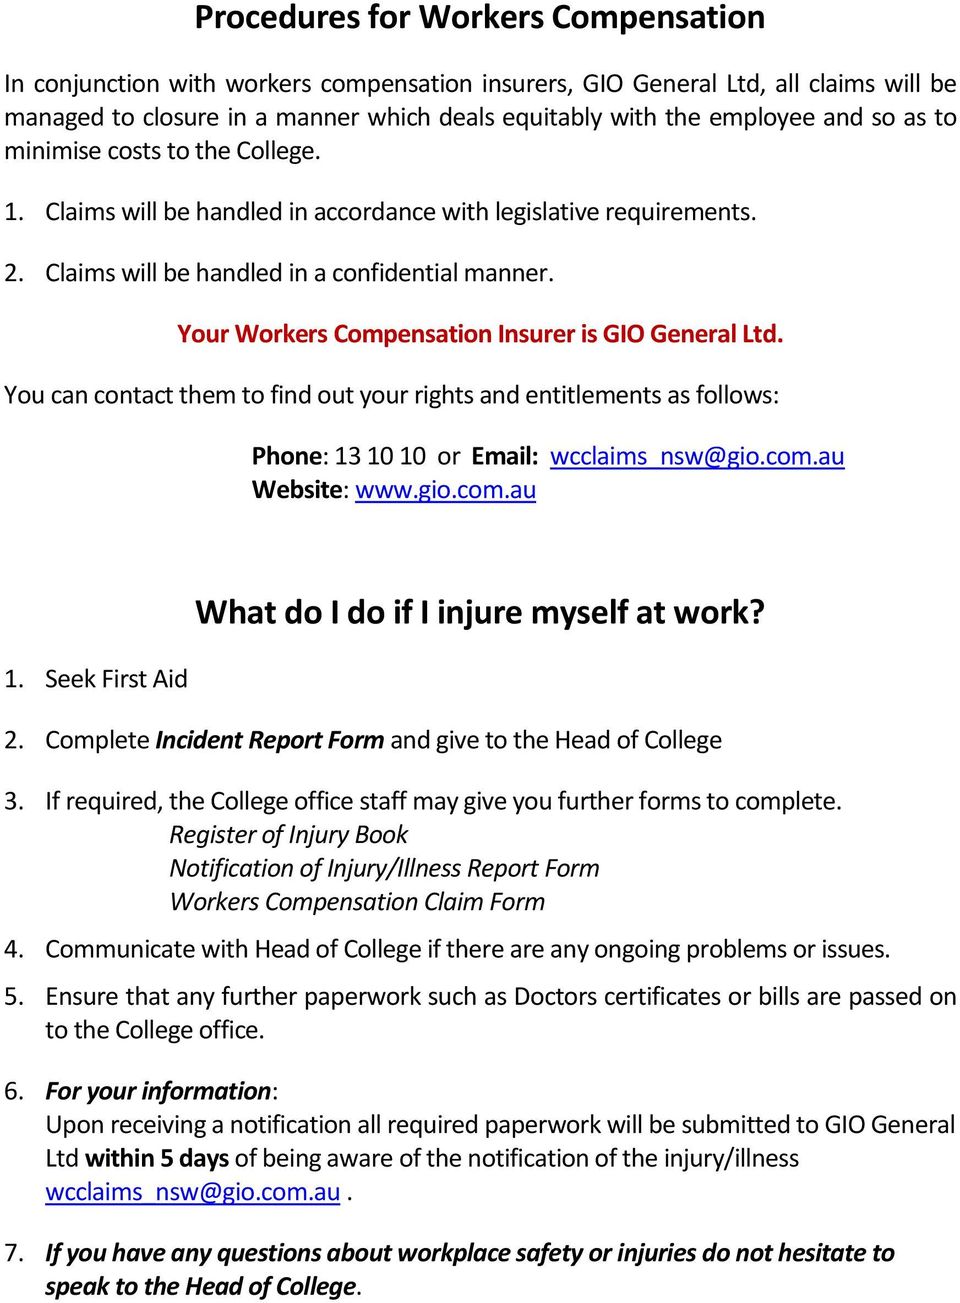 Your Workers Compensation Insurer is GIO General Ltd. You can contact them to find out your rights and entitlements as follows: Phone: 13 10 10 or Email: wcclaims_nsw@gio.com.au Website: www.gio.com.au 1.